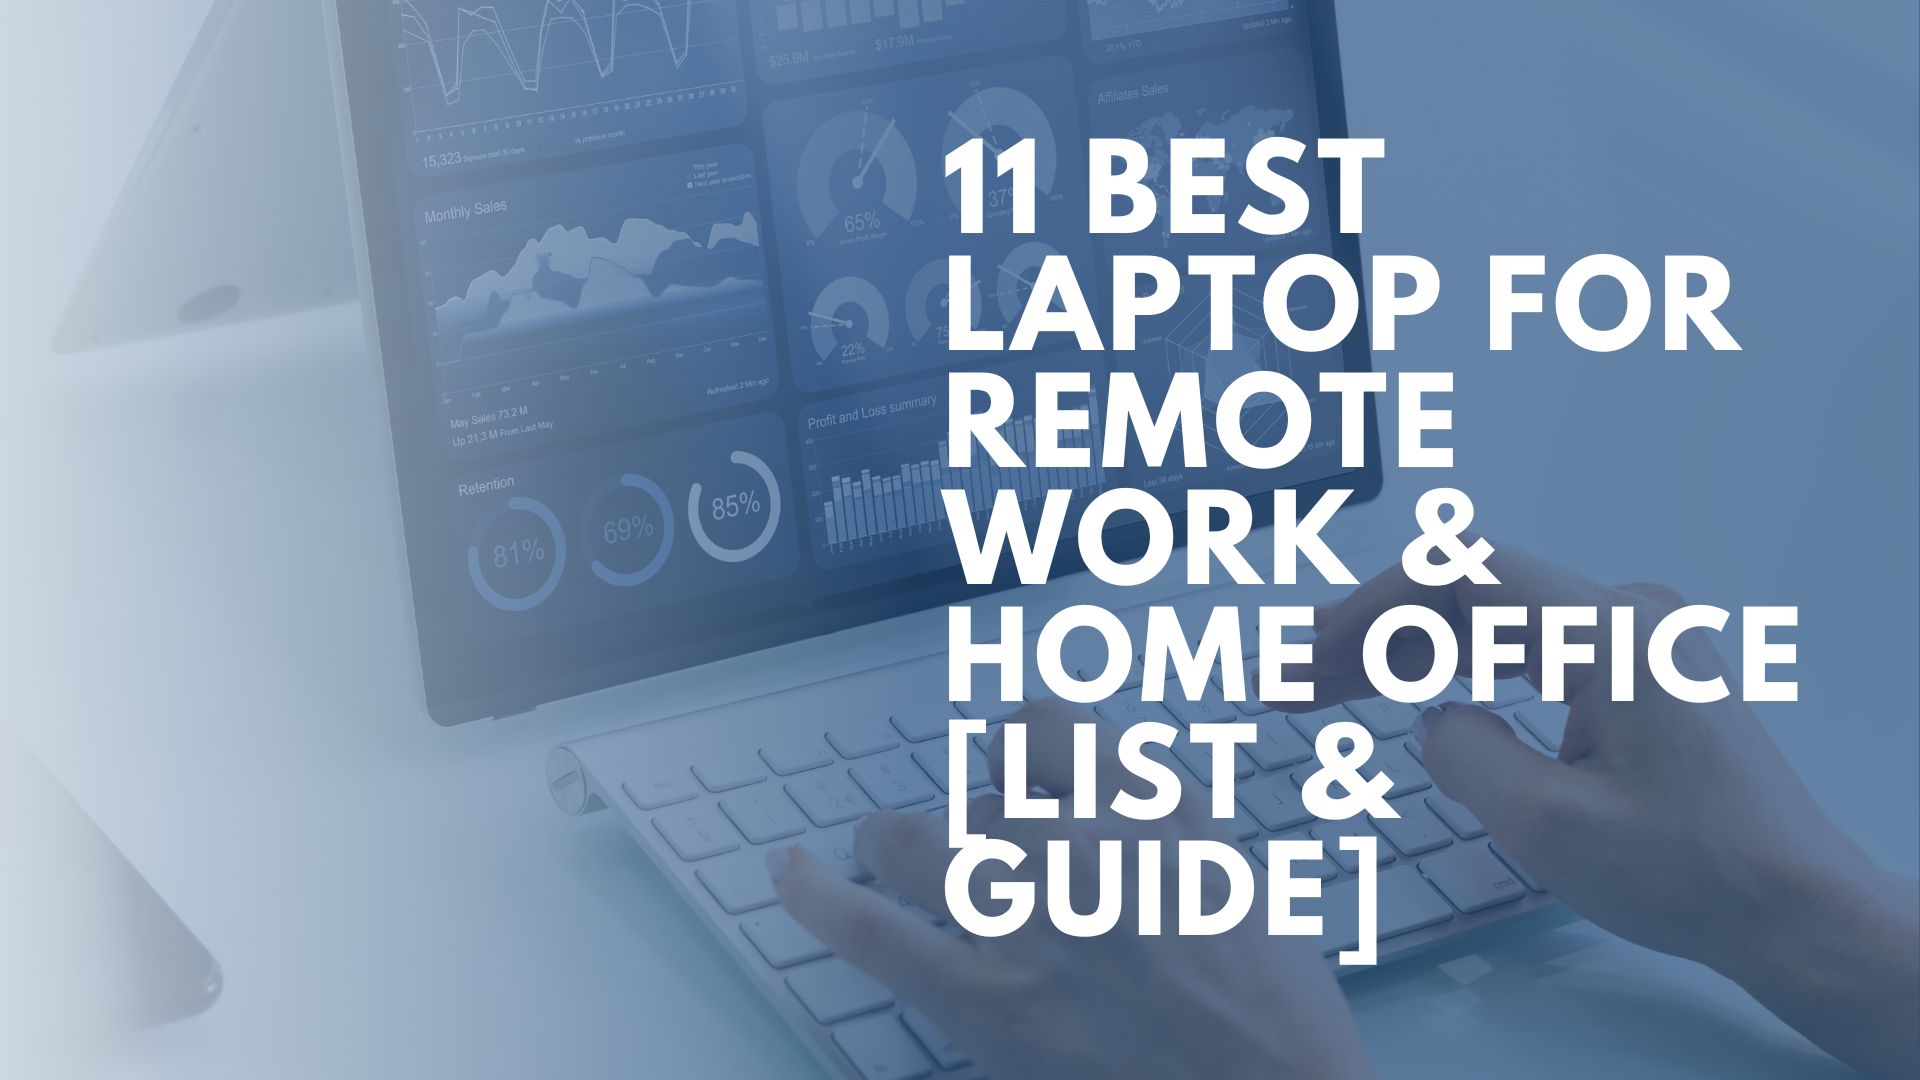 11 Best Laptop for Remote Work & Home Office [List & Guide]